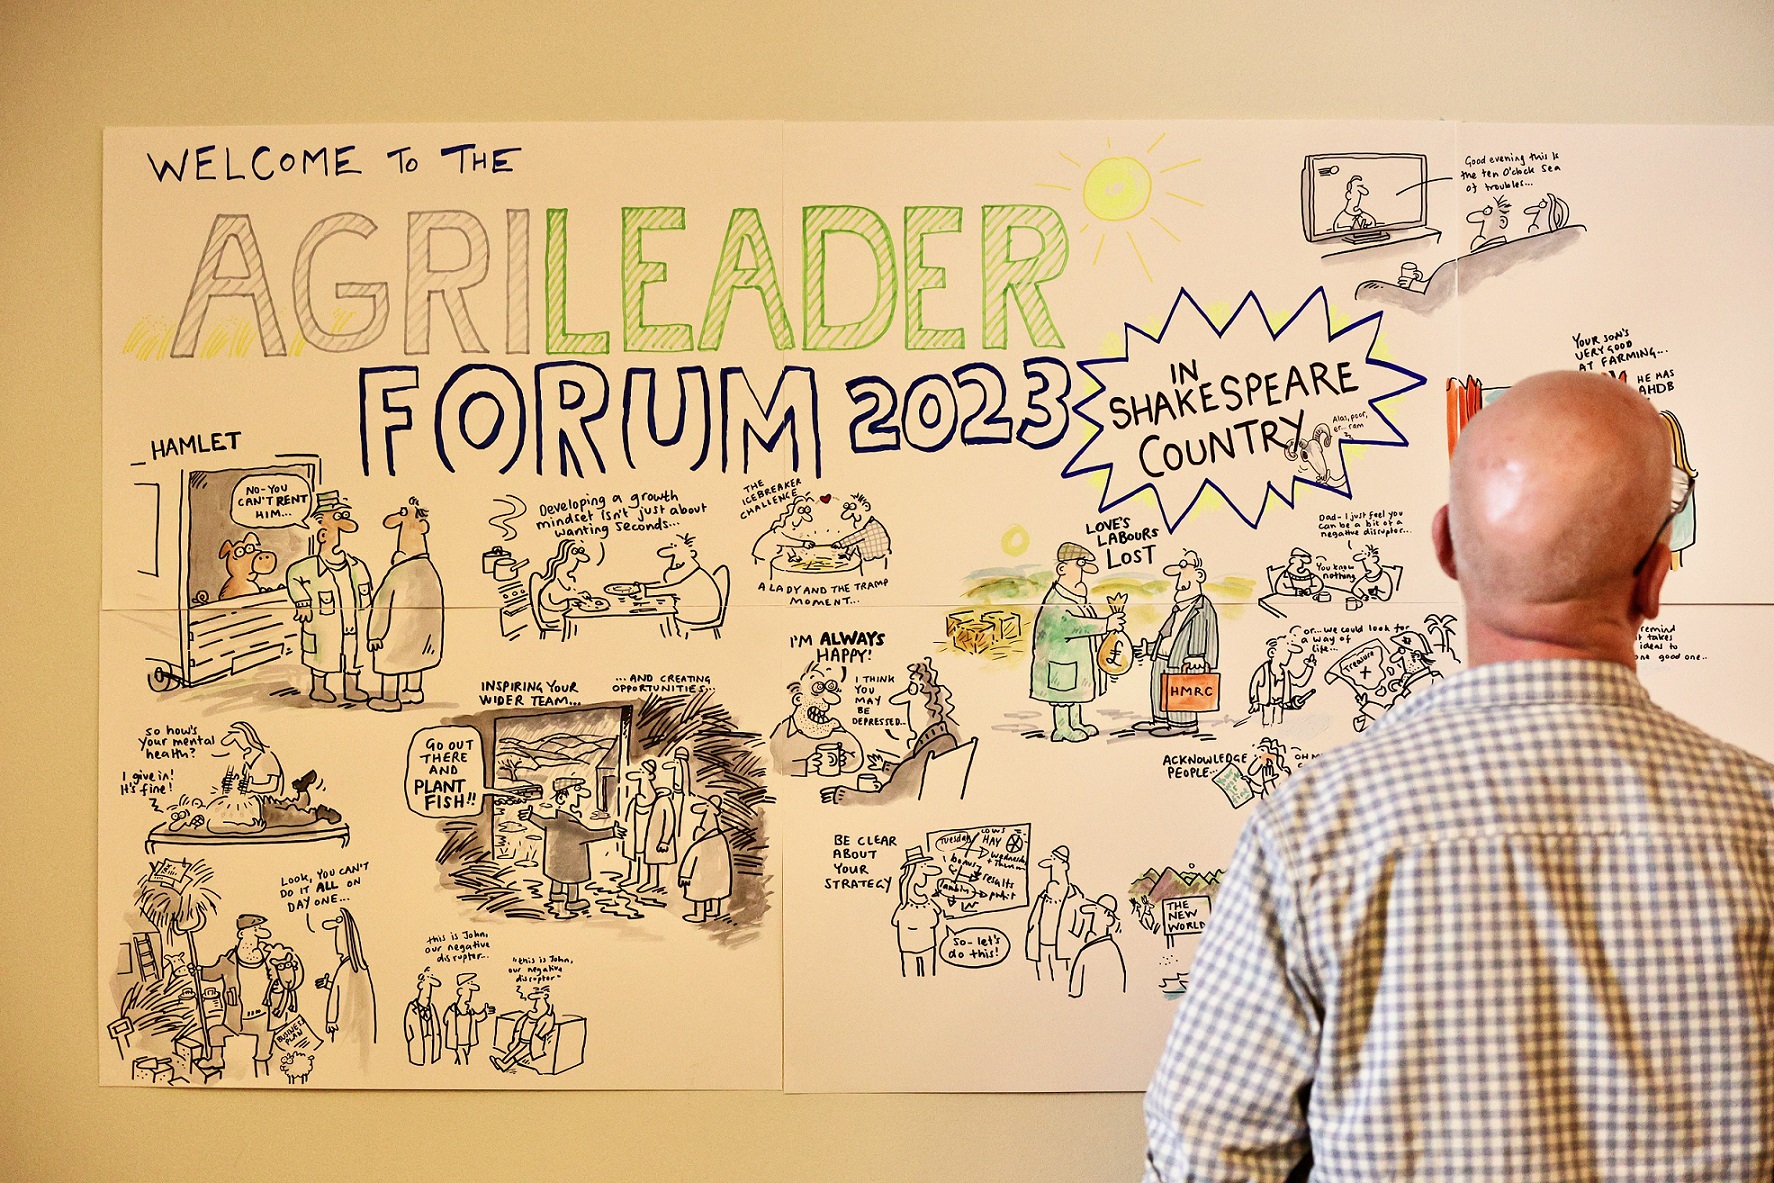 Artist drawing cartoons portraying discussion points from conference